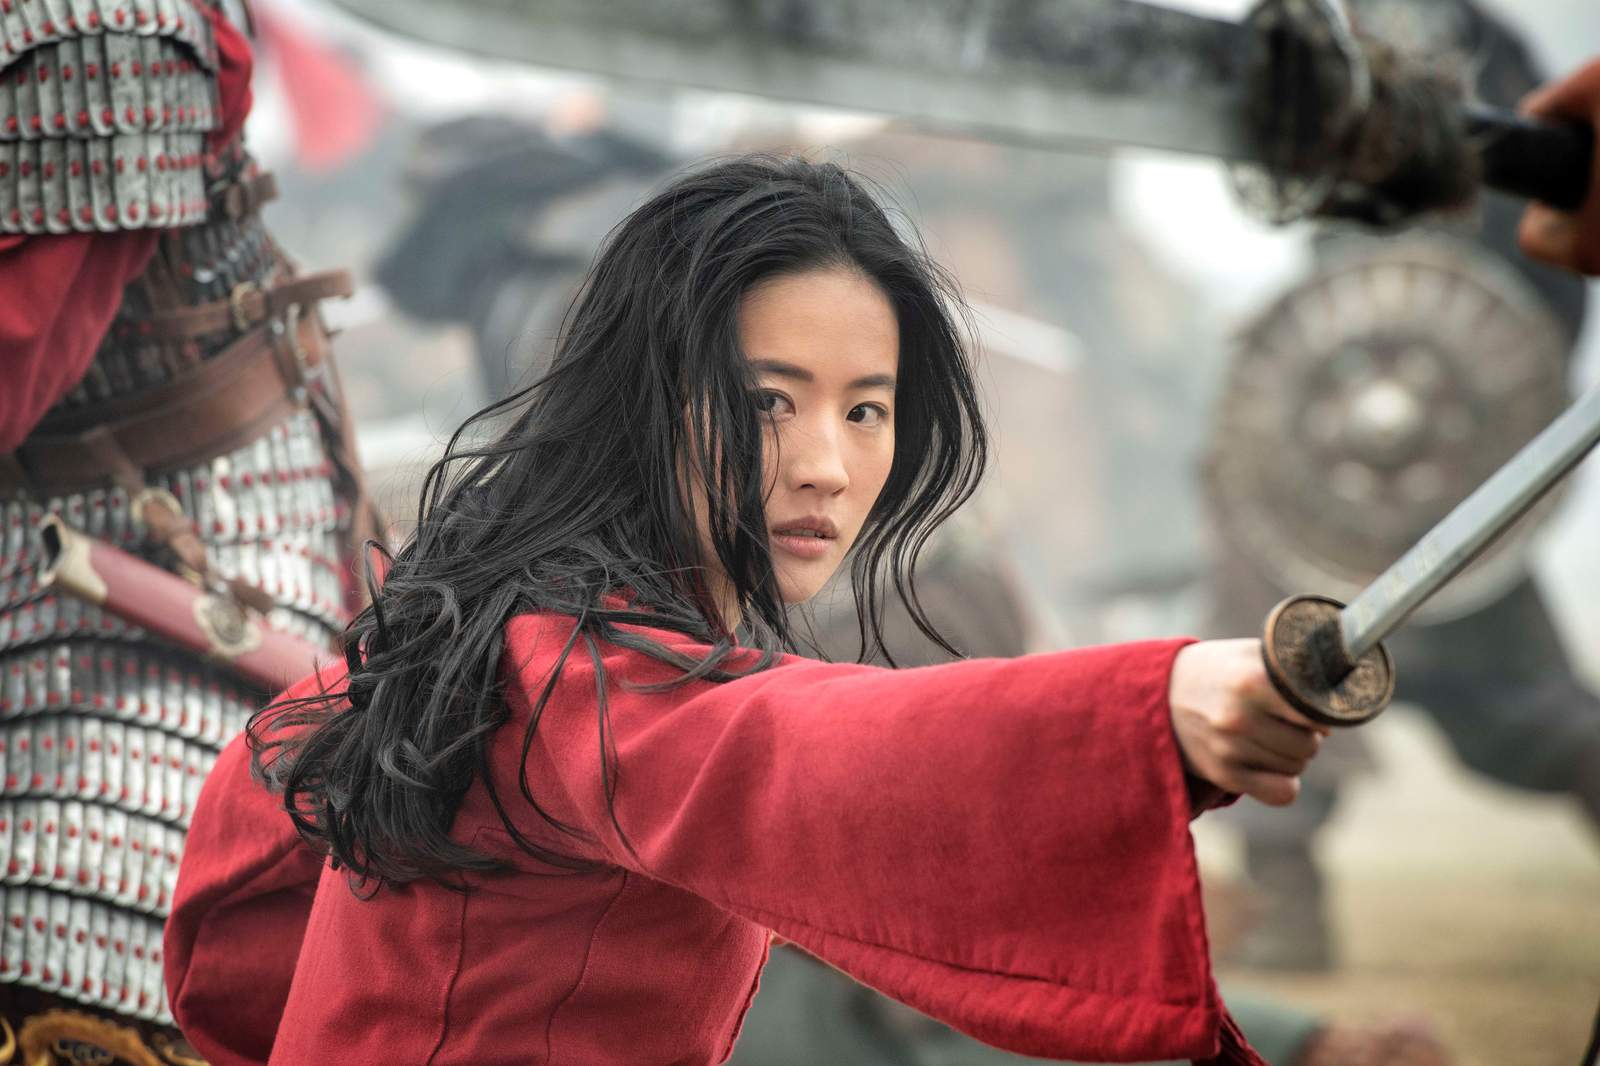 Review: Disney nails action in rousing reimagining of Mulan